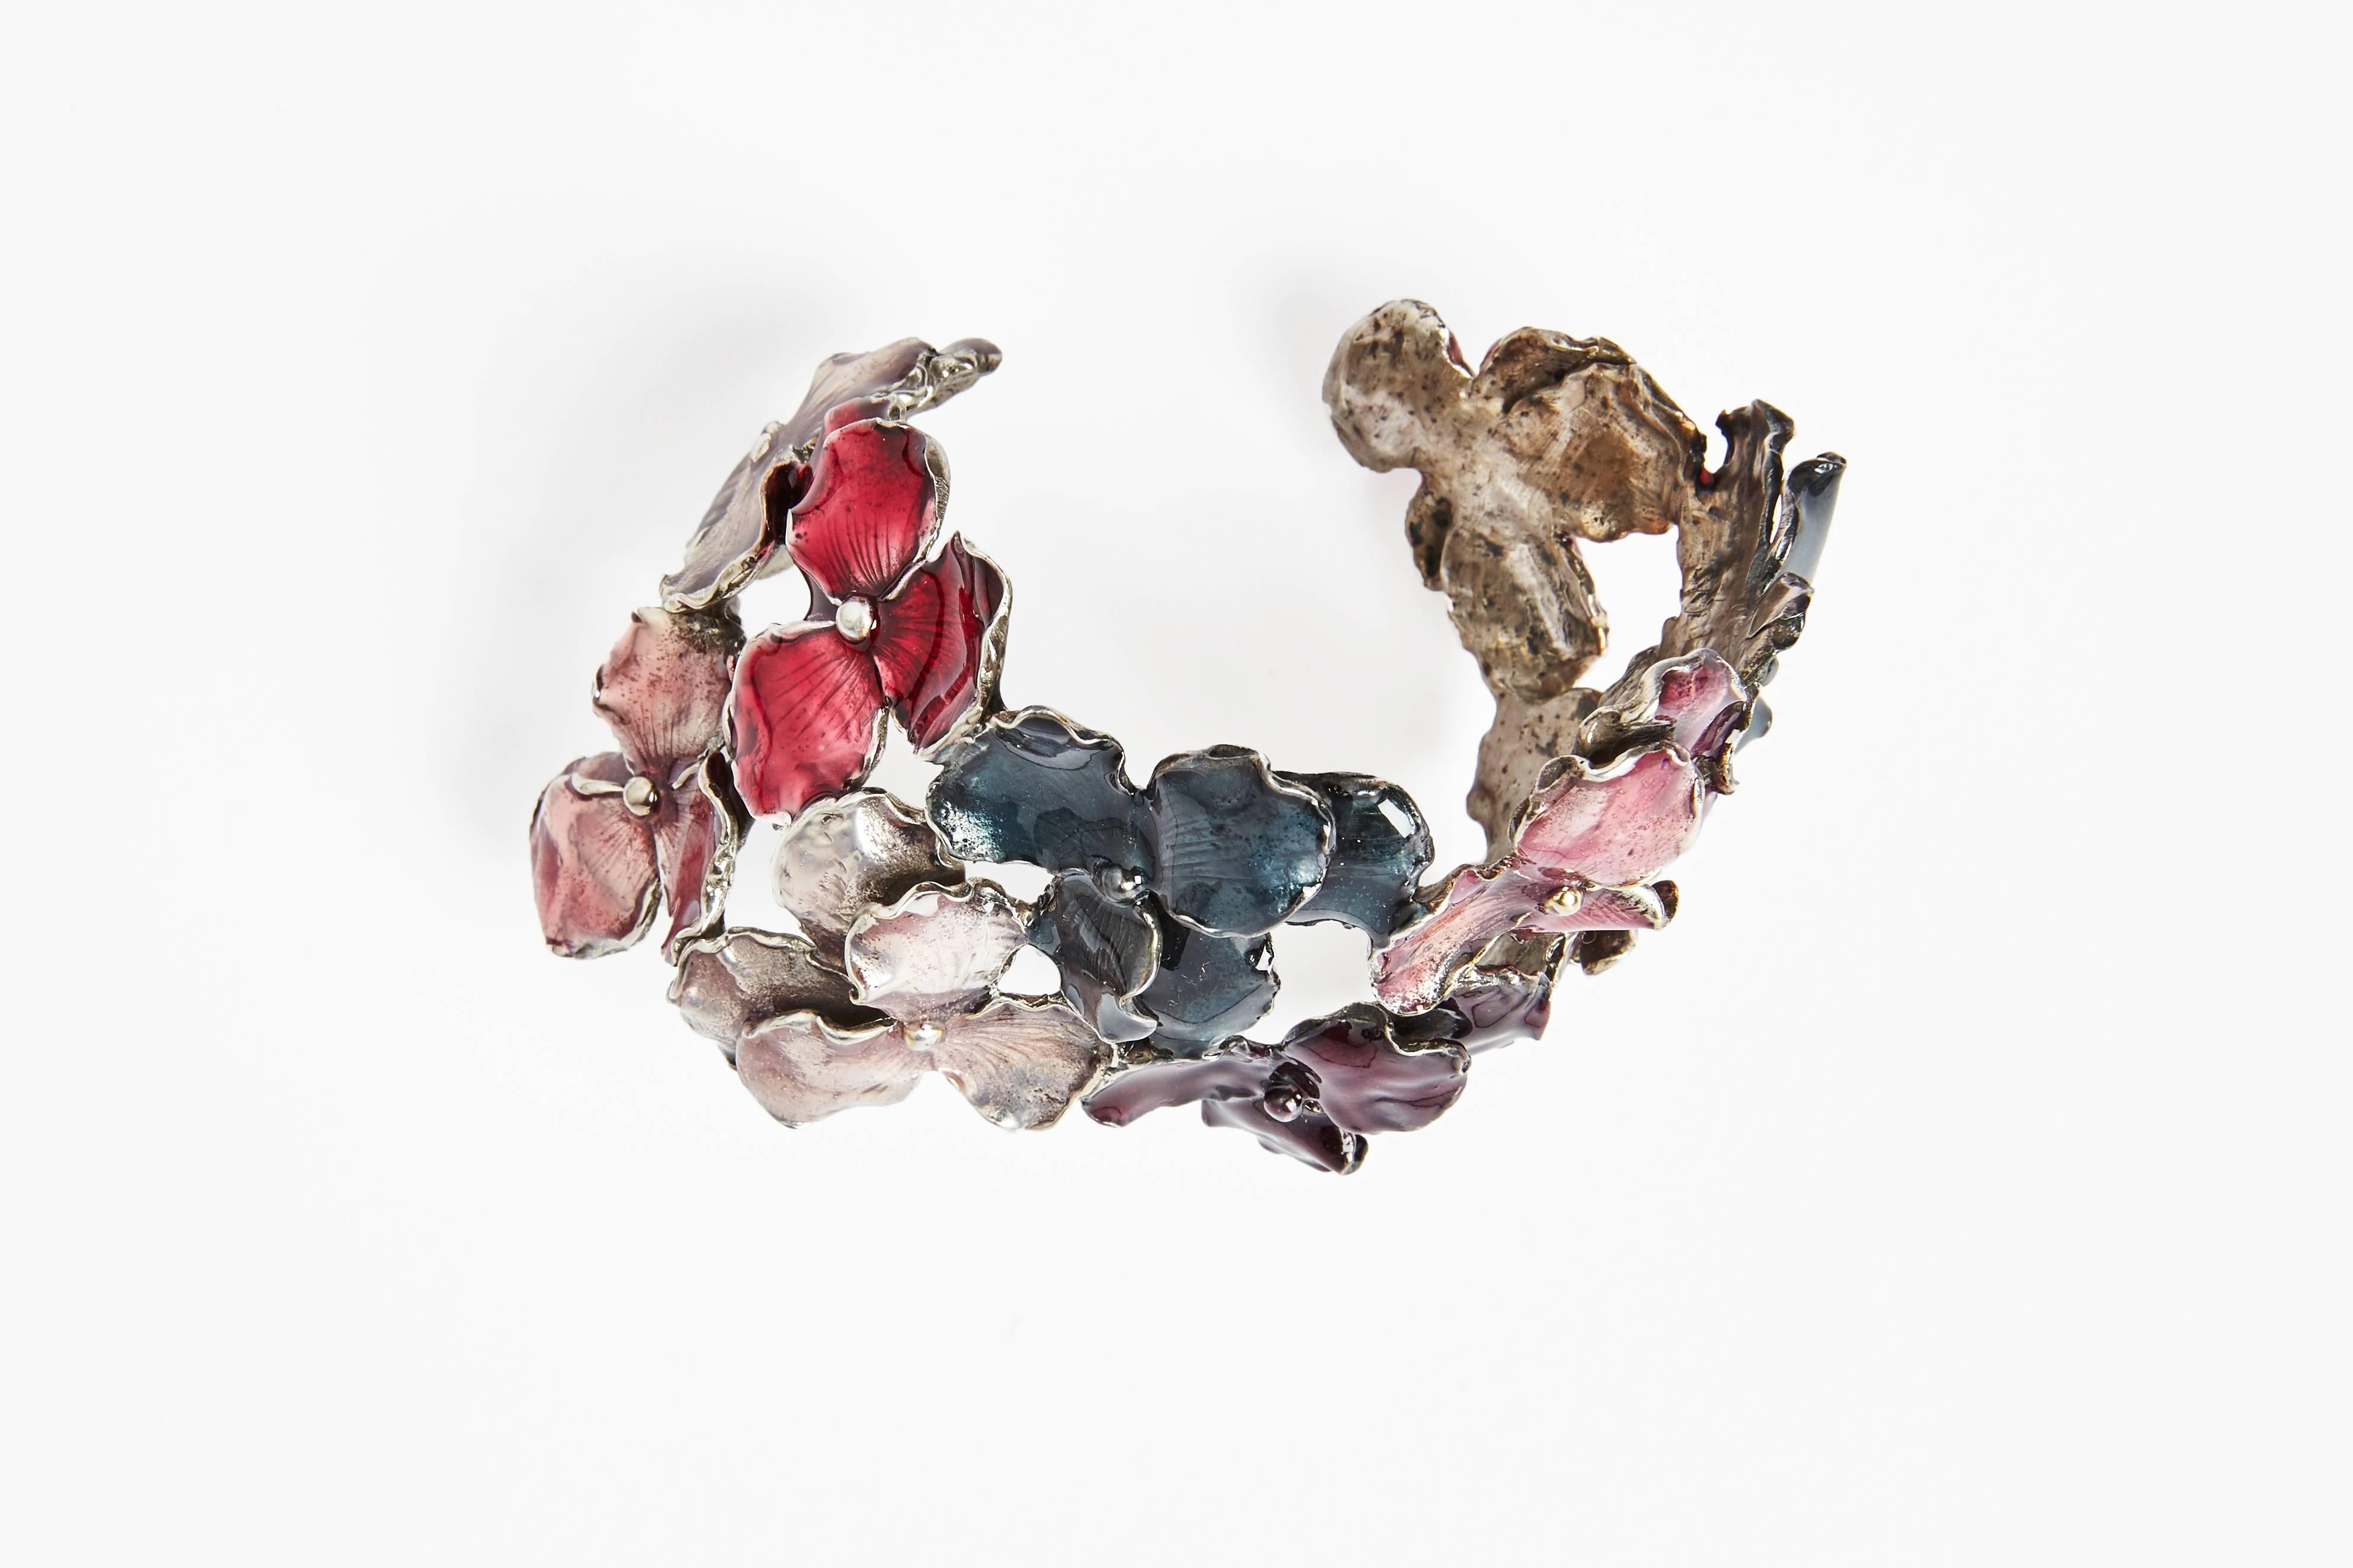 The Panze bracelet by Osanna and Madina Visconti. Brass Silver plated bracelet filled with different colors of enamel. Handcrafted in Italy by Osanna and Madina Visconti di Modrone. 

Fits beautifully and can be adjusted on the wrist.